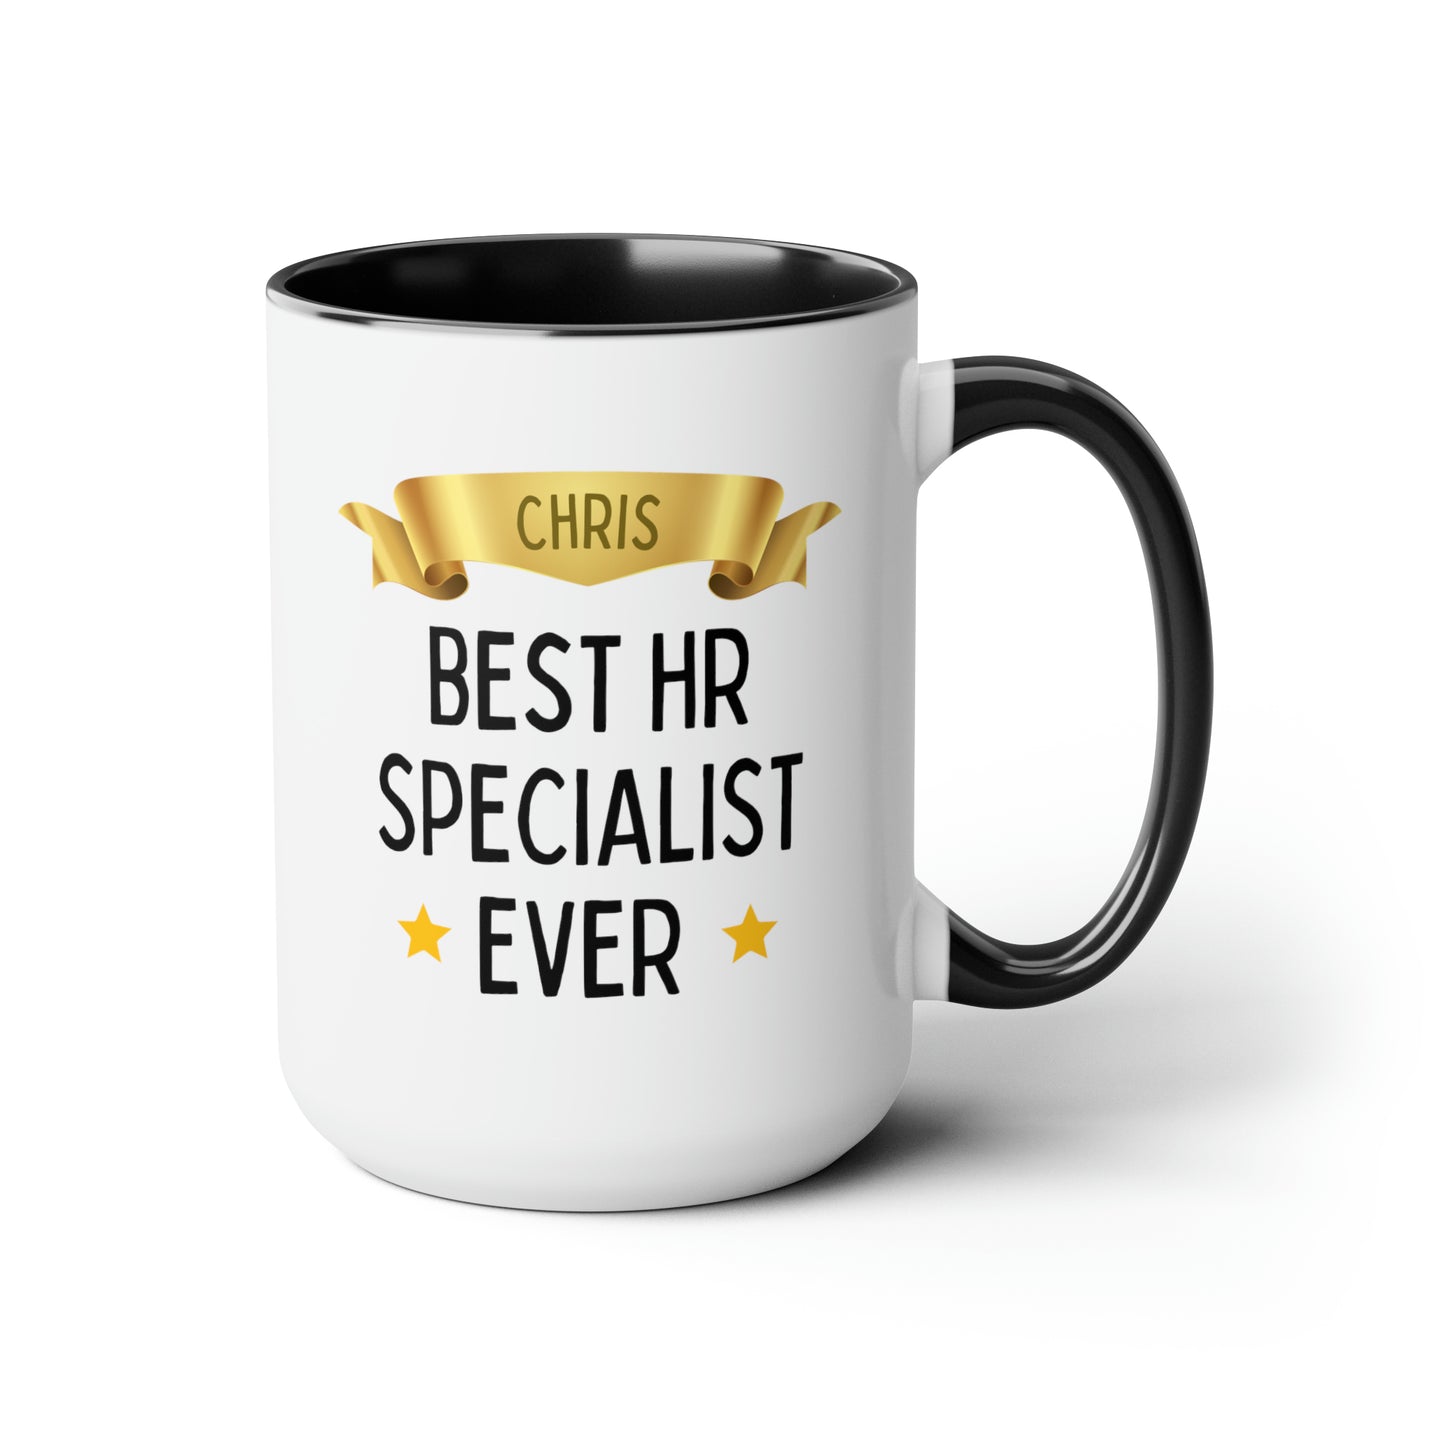 Best HR Specialist Ever 15oz white with black accent funny large coffee mug gift for human resources manager officer custom name personalize waveywares wavey wares wavywares wavy wares